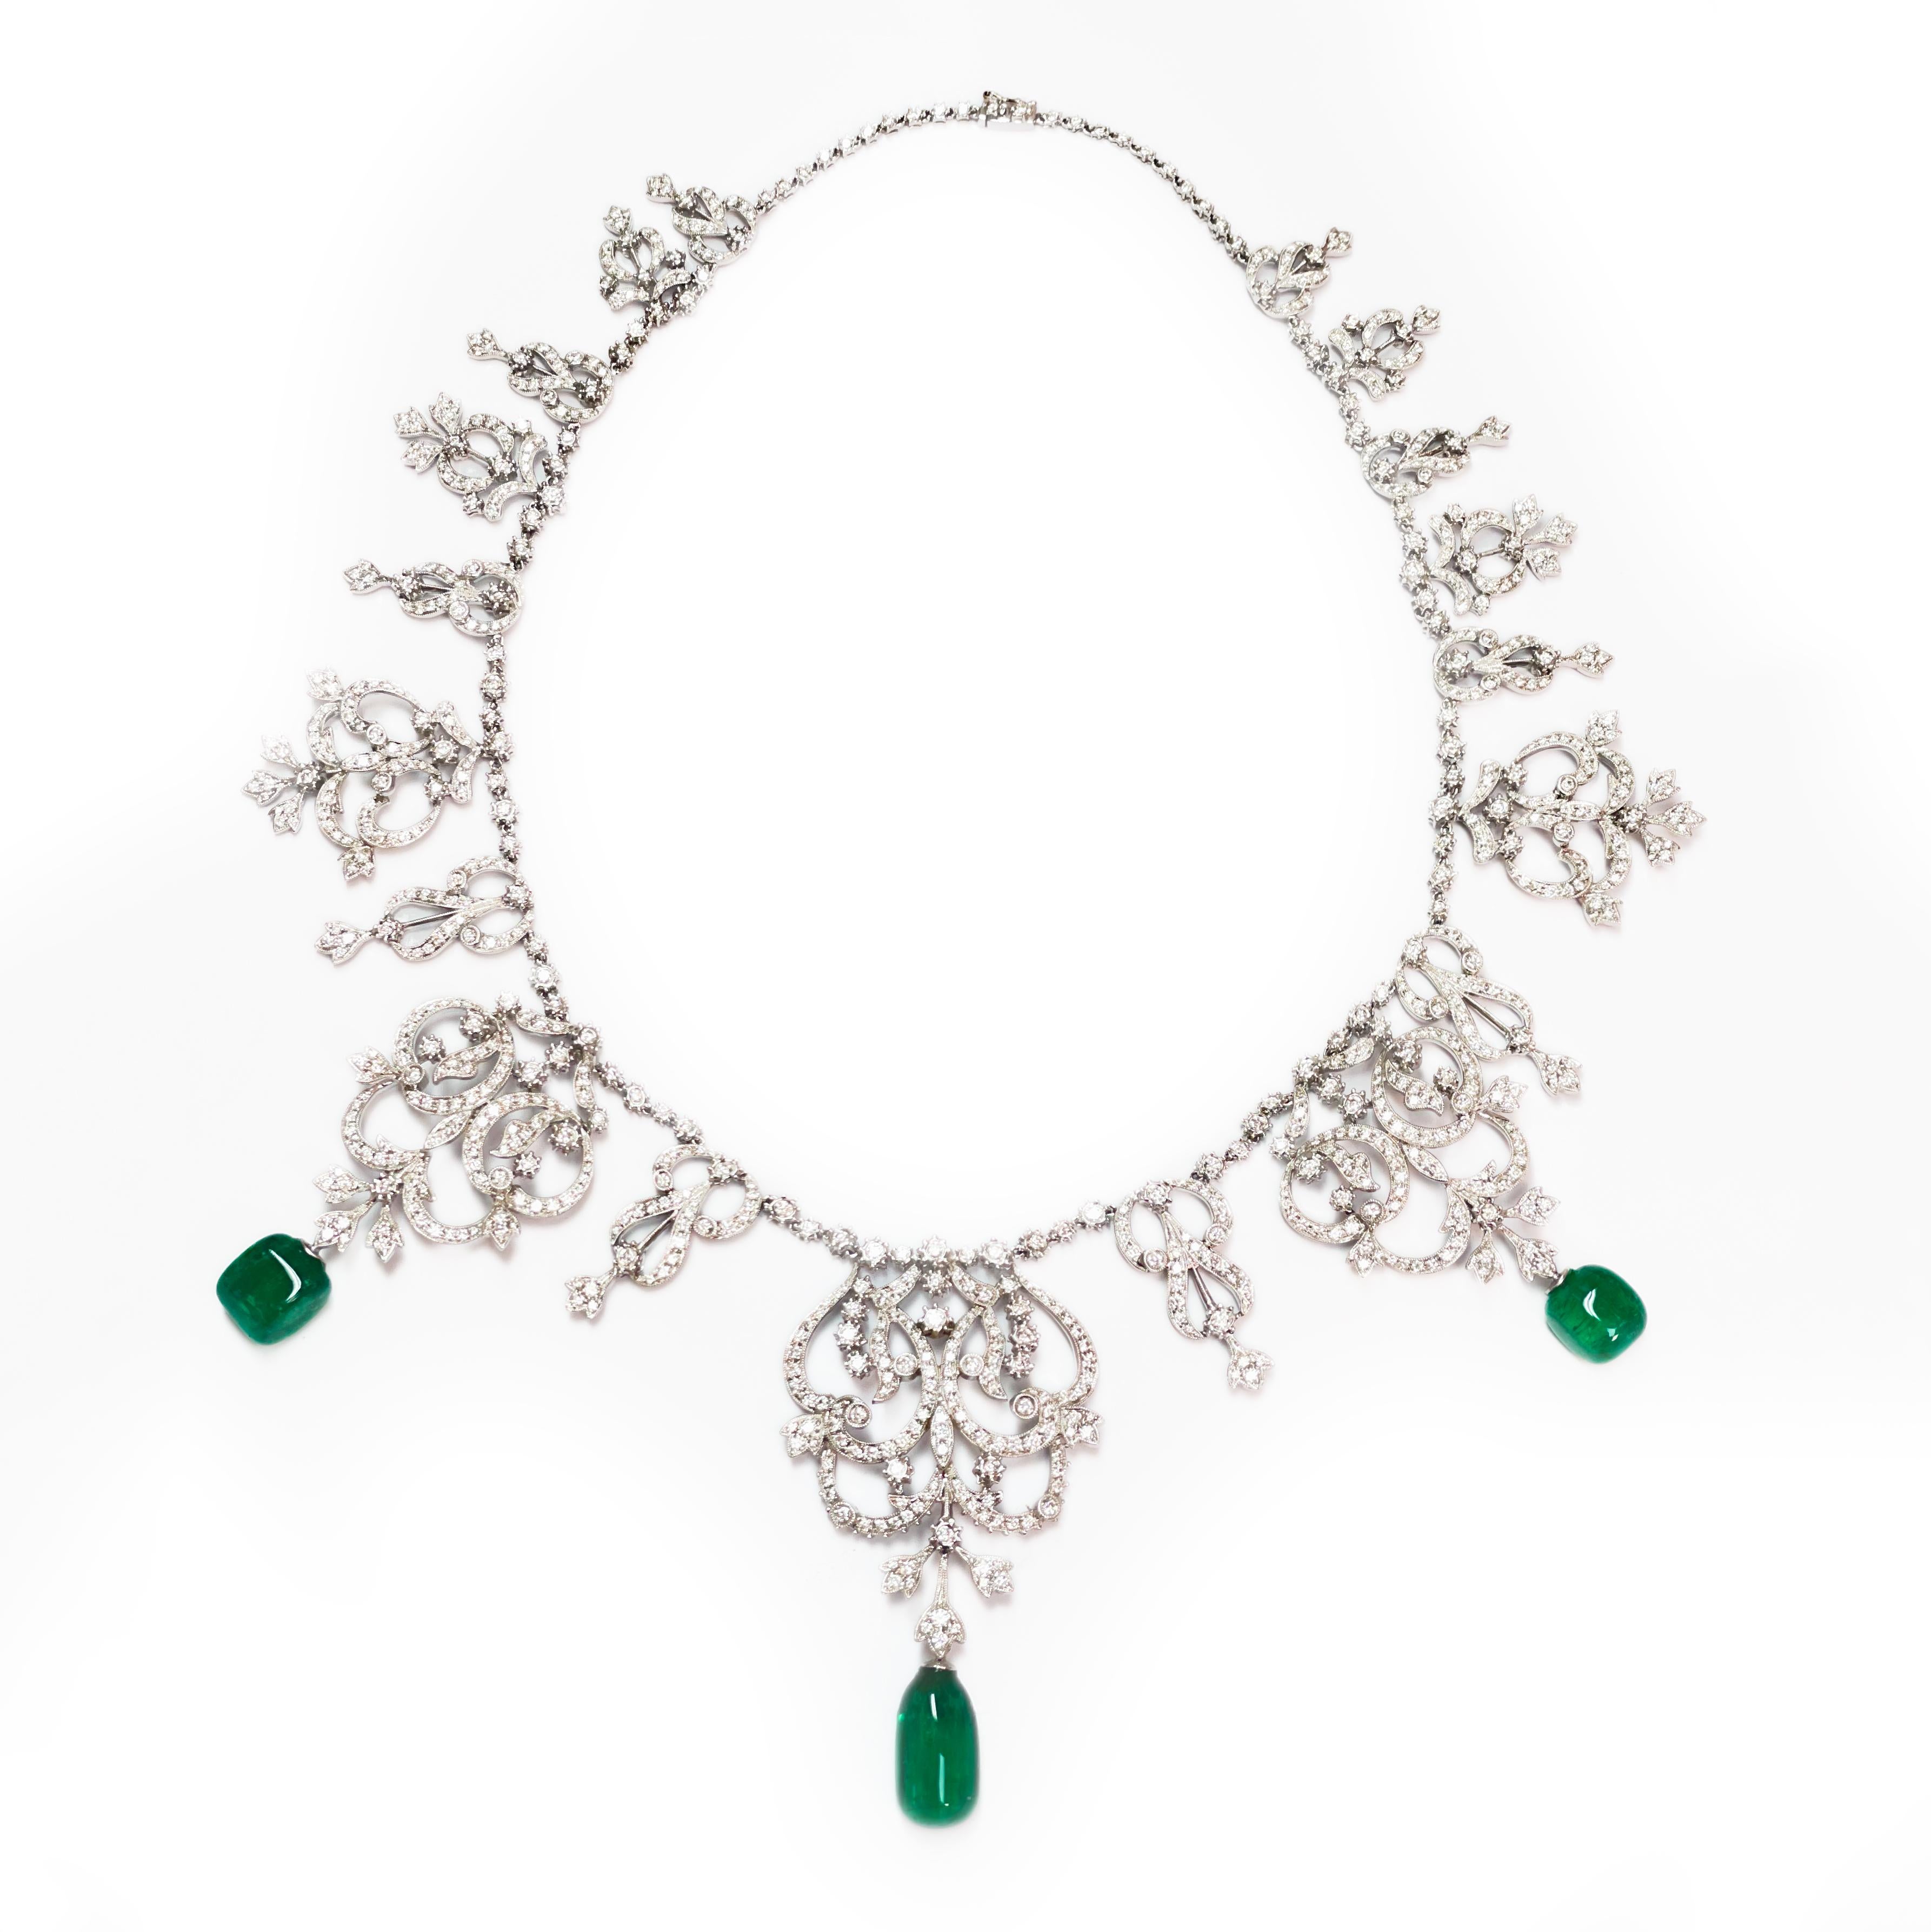 Rare Himalayan Mountain Emerald and Diamond convertible Tiara/Necklace

A very beautiful and unique tiara that also converts into a necklace. 

It features 3 stunning GRS-certified natural emerald beads weighing a total of 27.05 carats, embellished